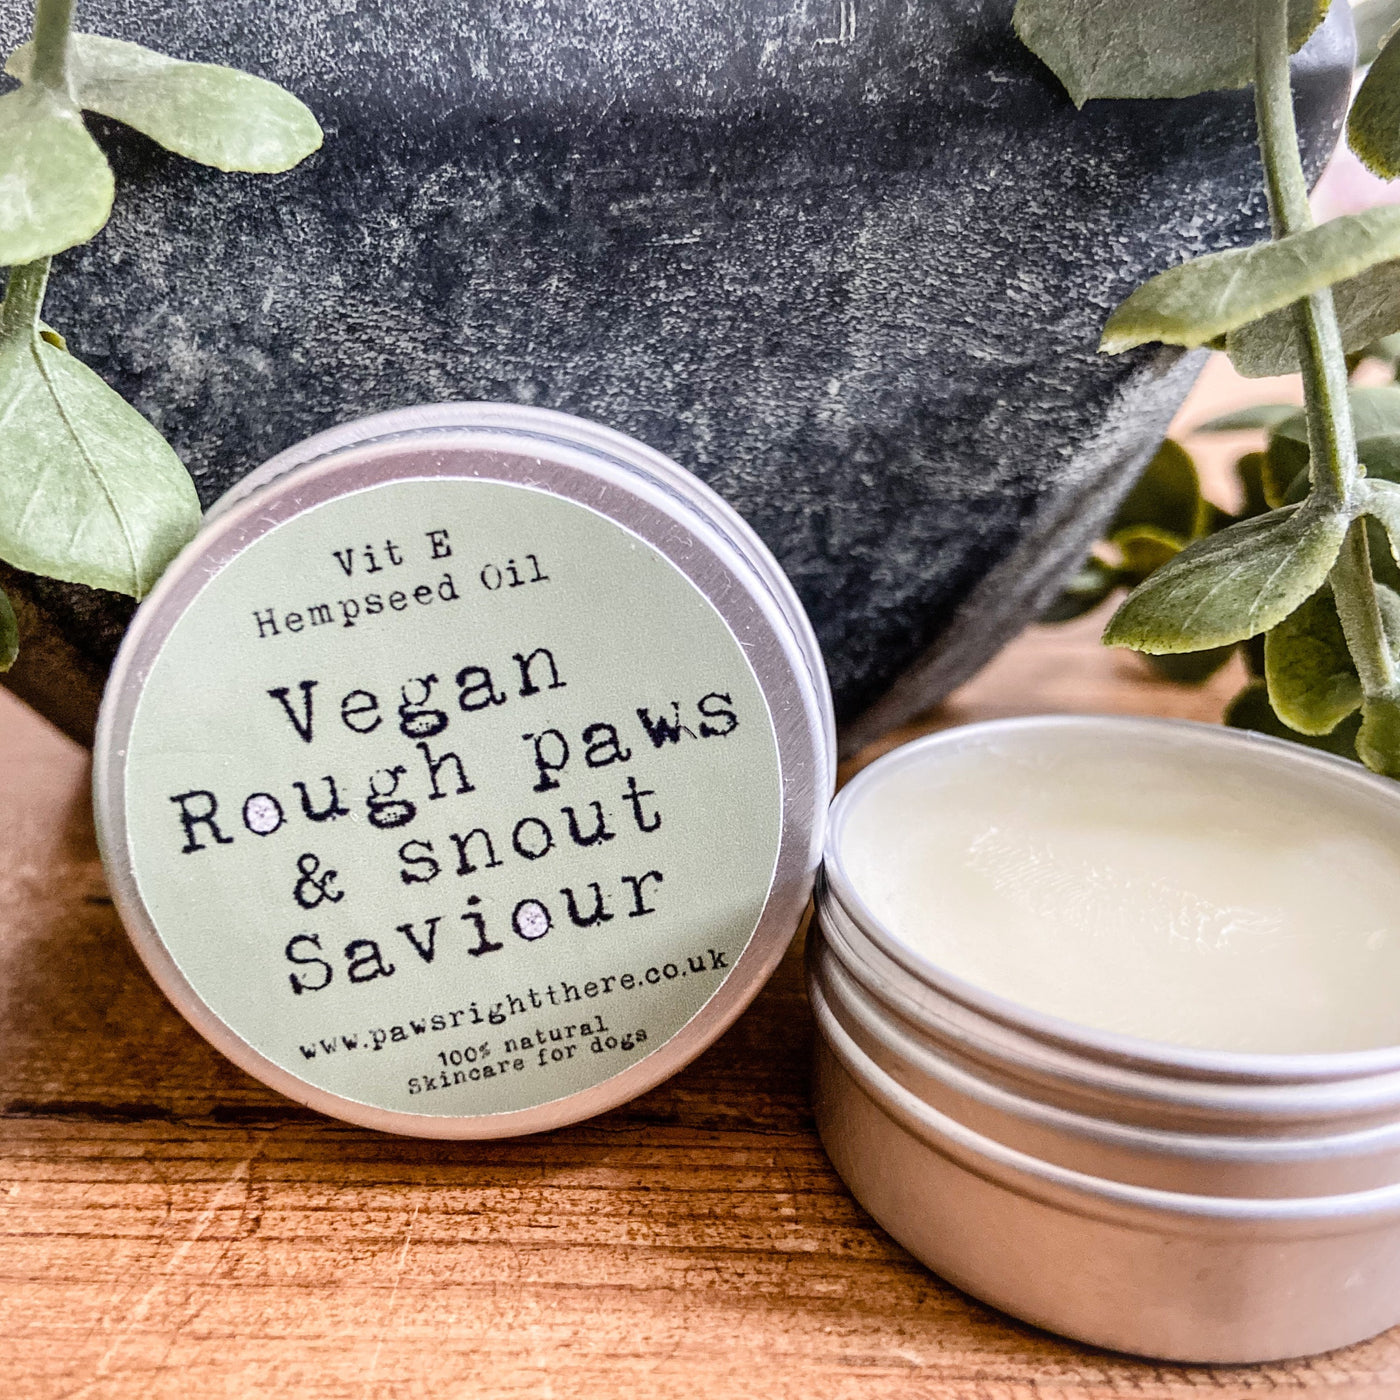 Vegan Rough Paws and Nose Dog Soothing Balm with vitamin E and hempseed oil.